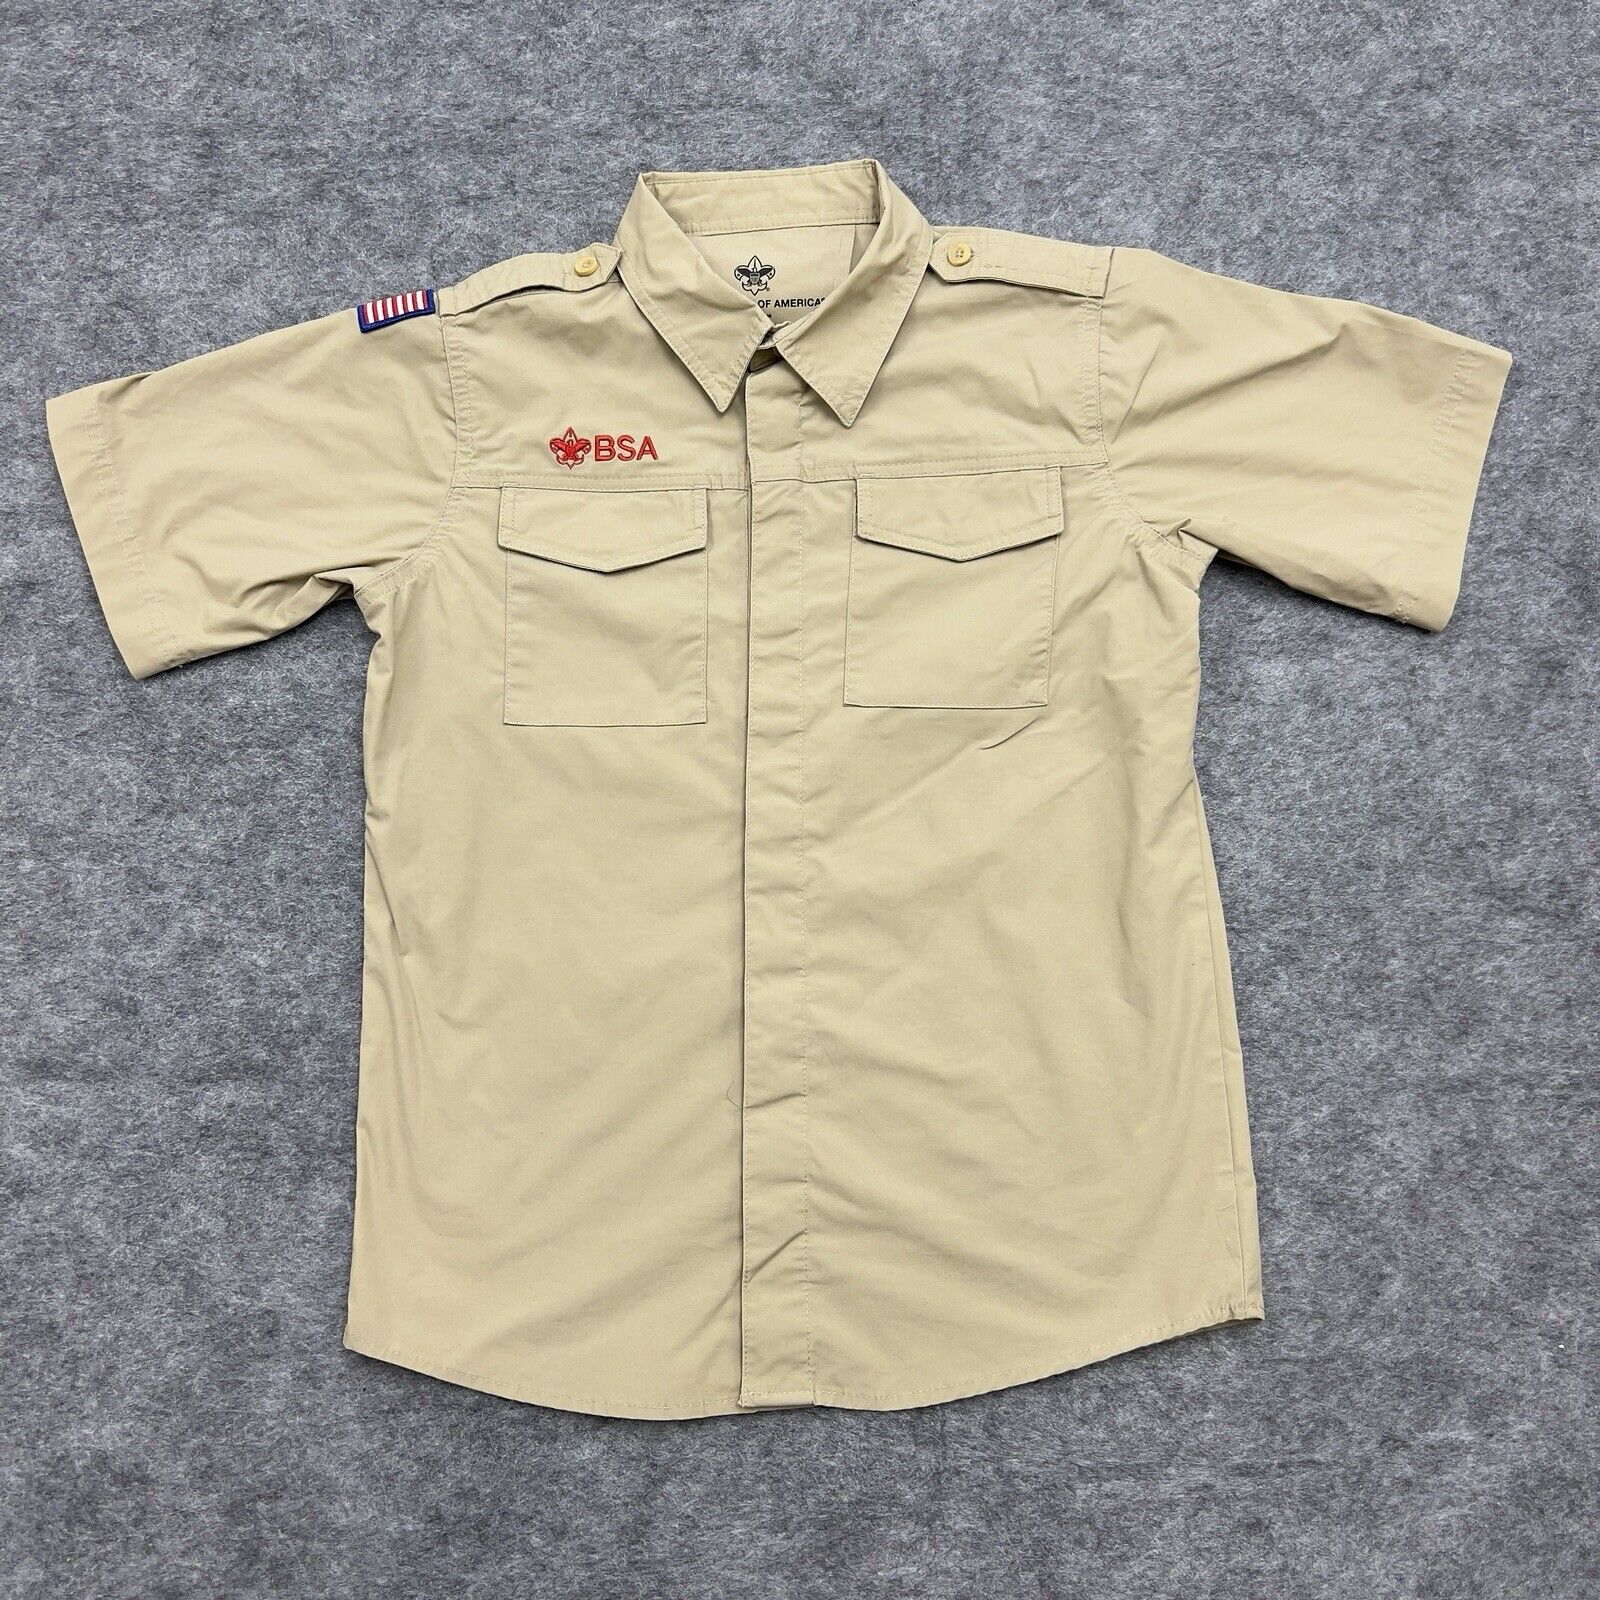 Boy Scouts Of America Button Up Shirt Youth Large Beige Short Sleeve Uniform *